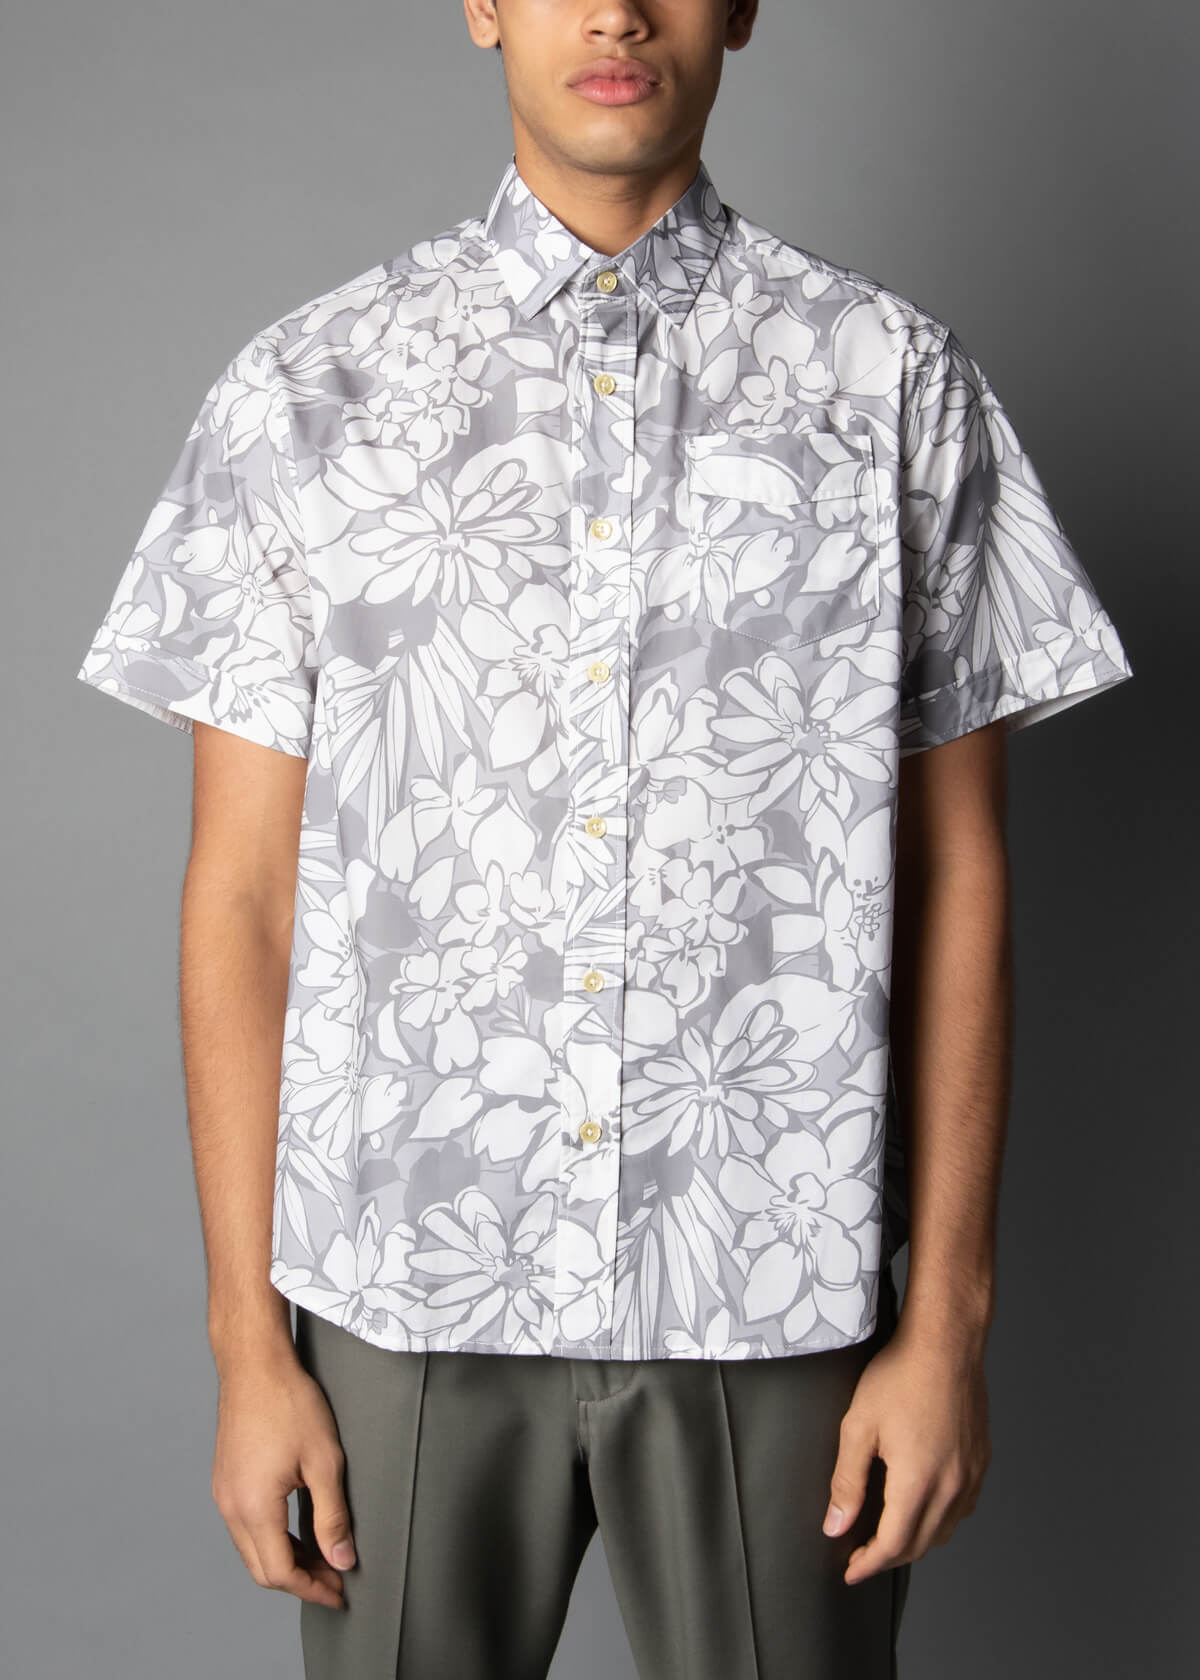 white and grey floral stencil print short sleeve men's shirt